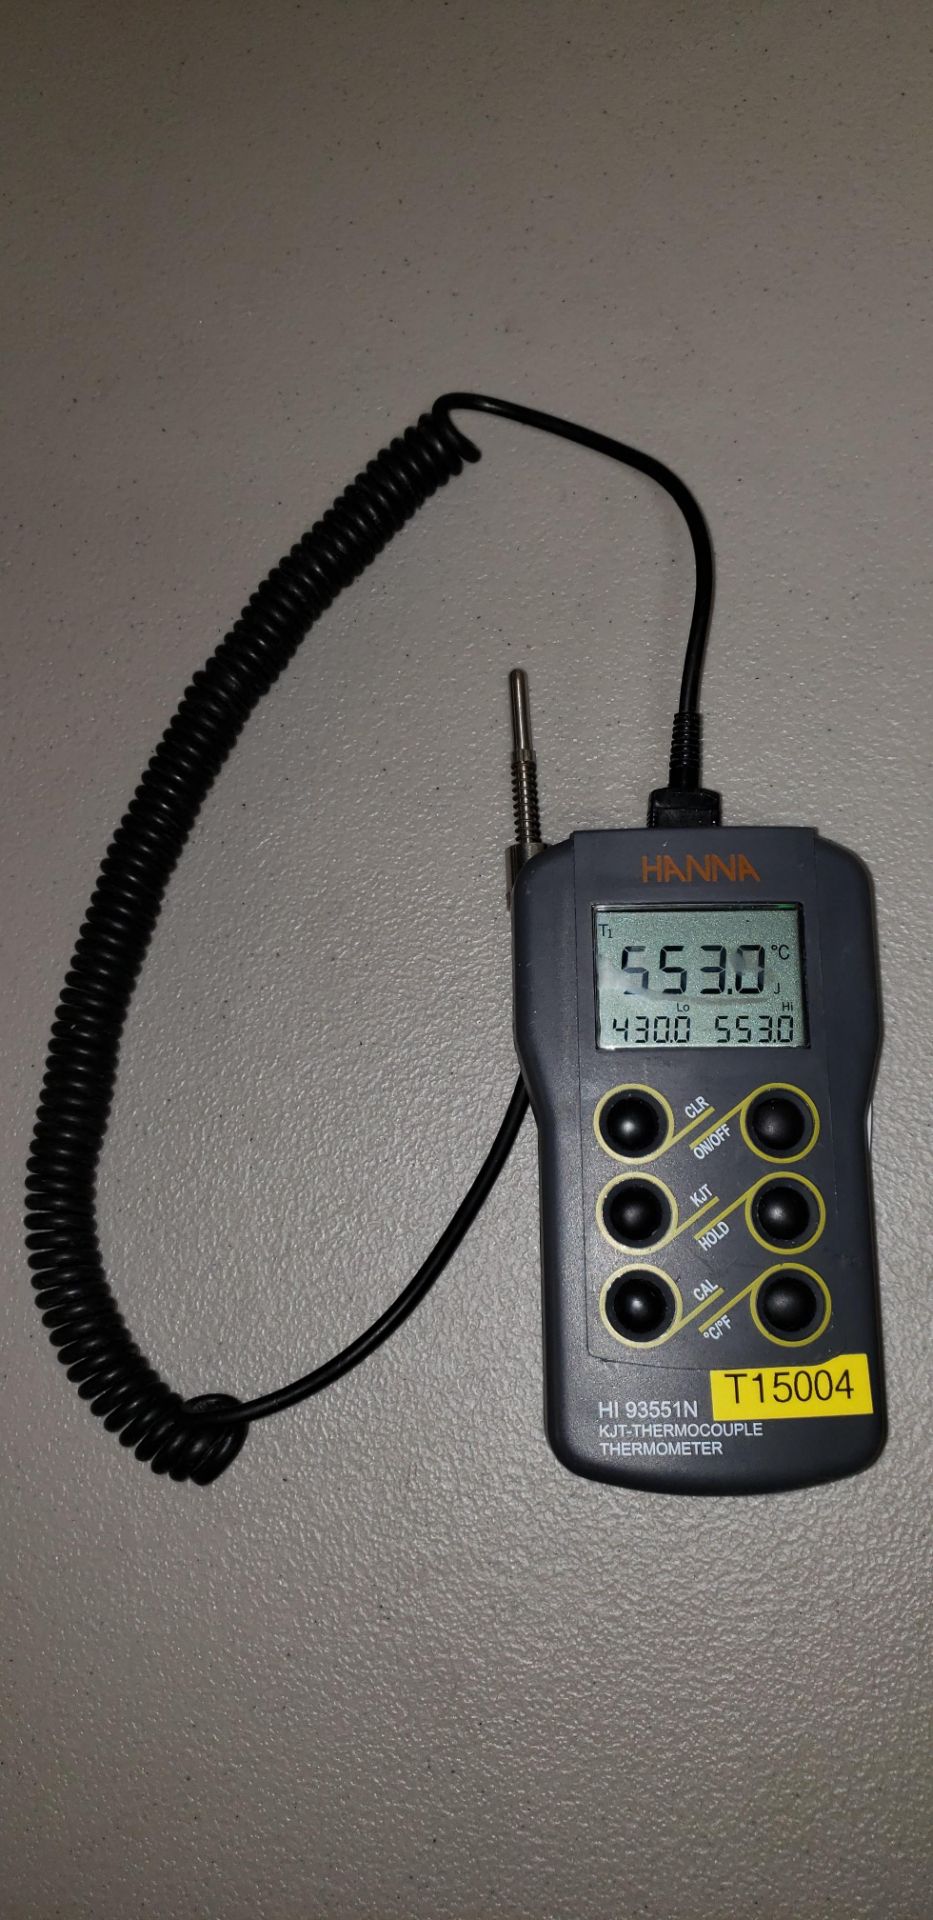 (2) Hanna Instruments HI 93551N KJT Single Channel ThermoCouple Thermometer with Probes - Image 3 of 5